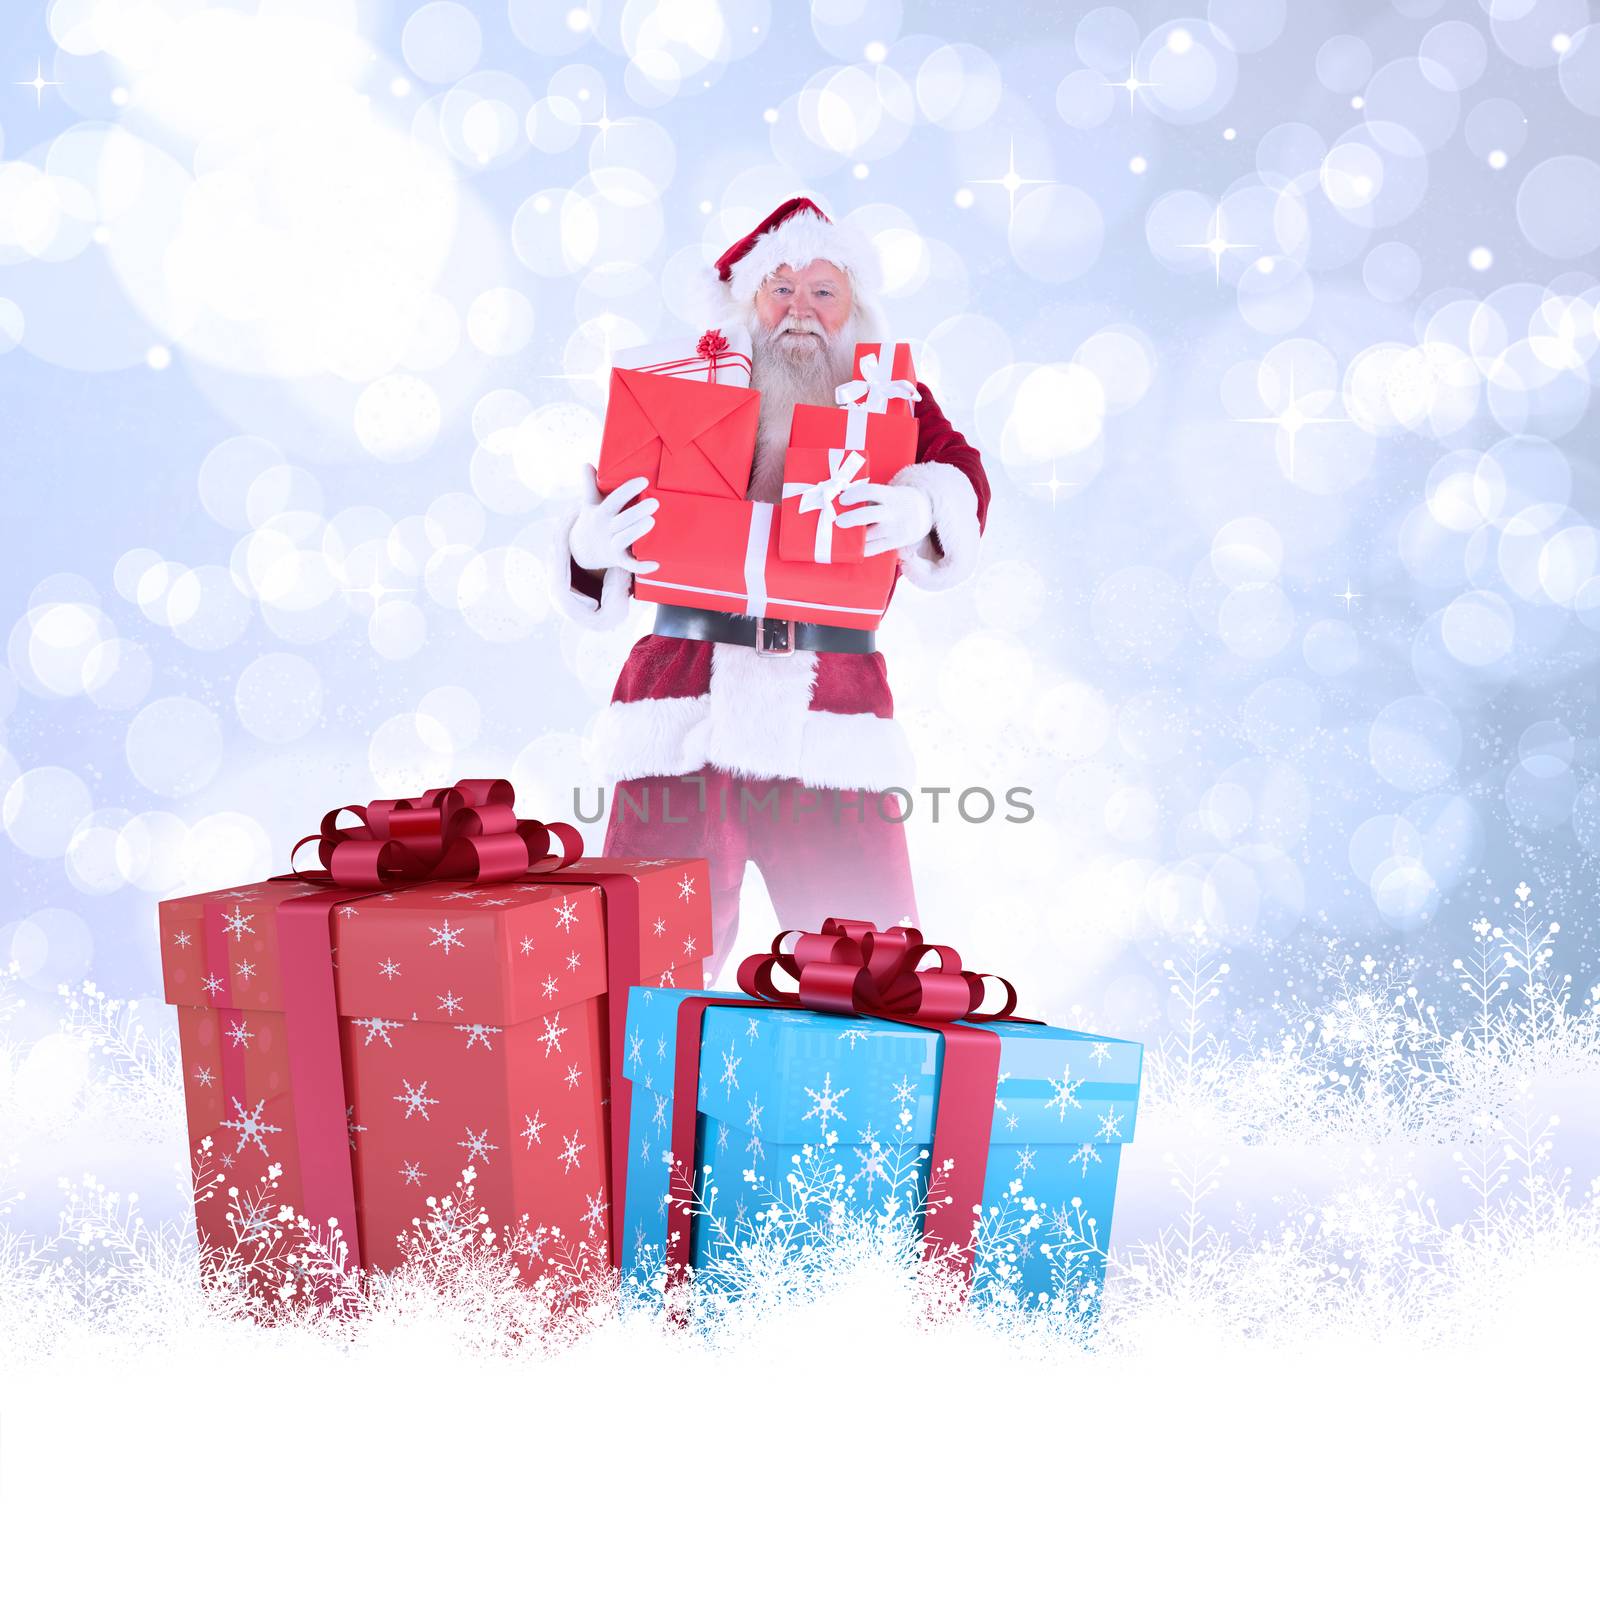 Santa carries a few presents against light glowing dots design pattern